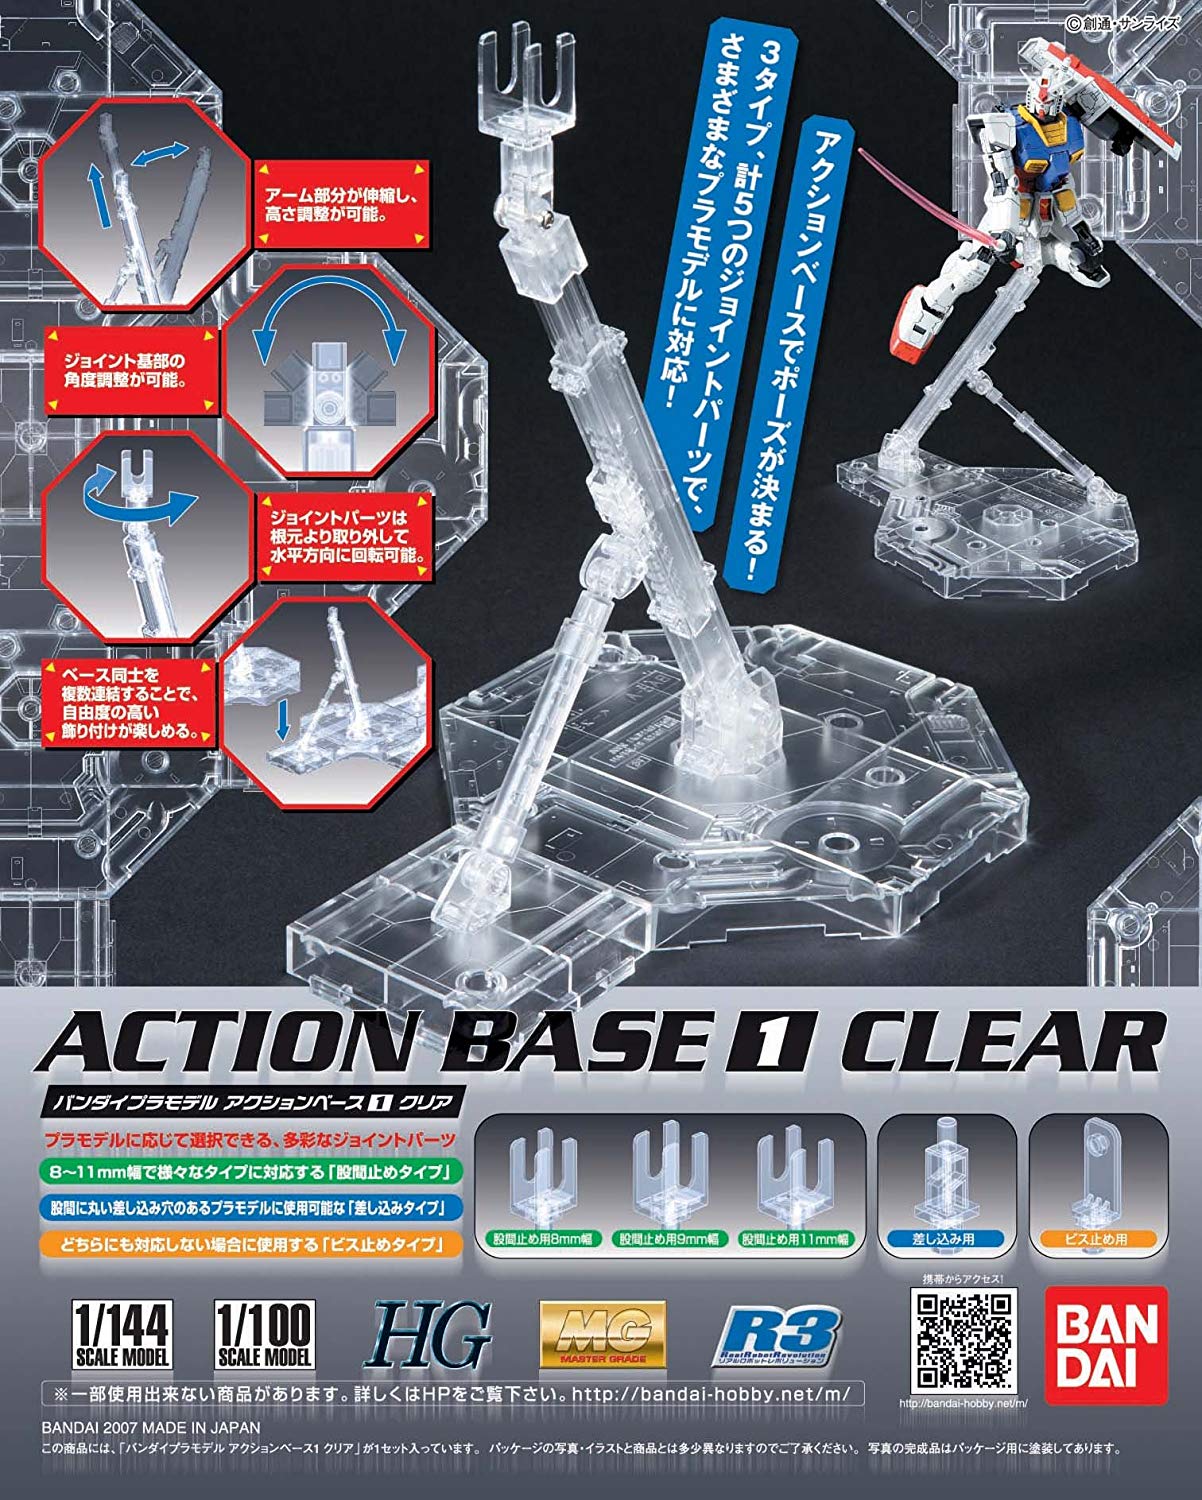 Action Base 1 (1/100) (1/144): Clear 